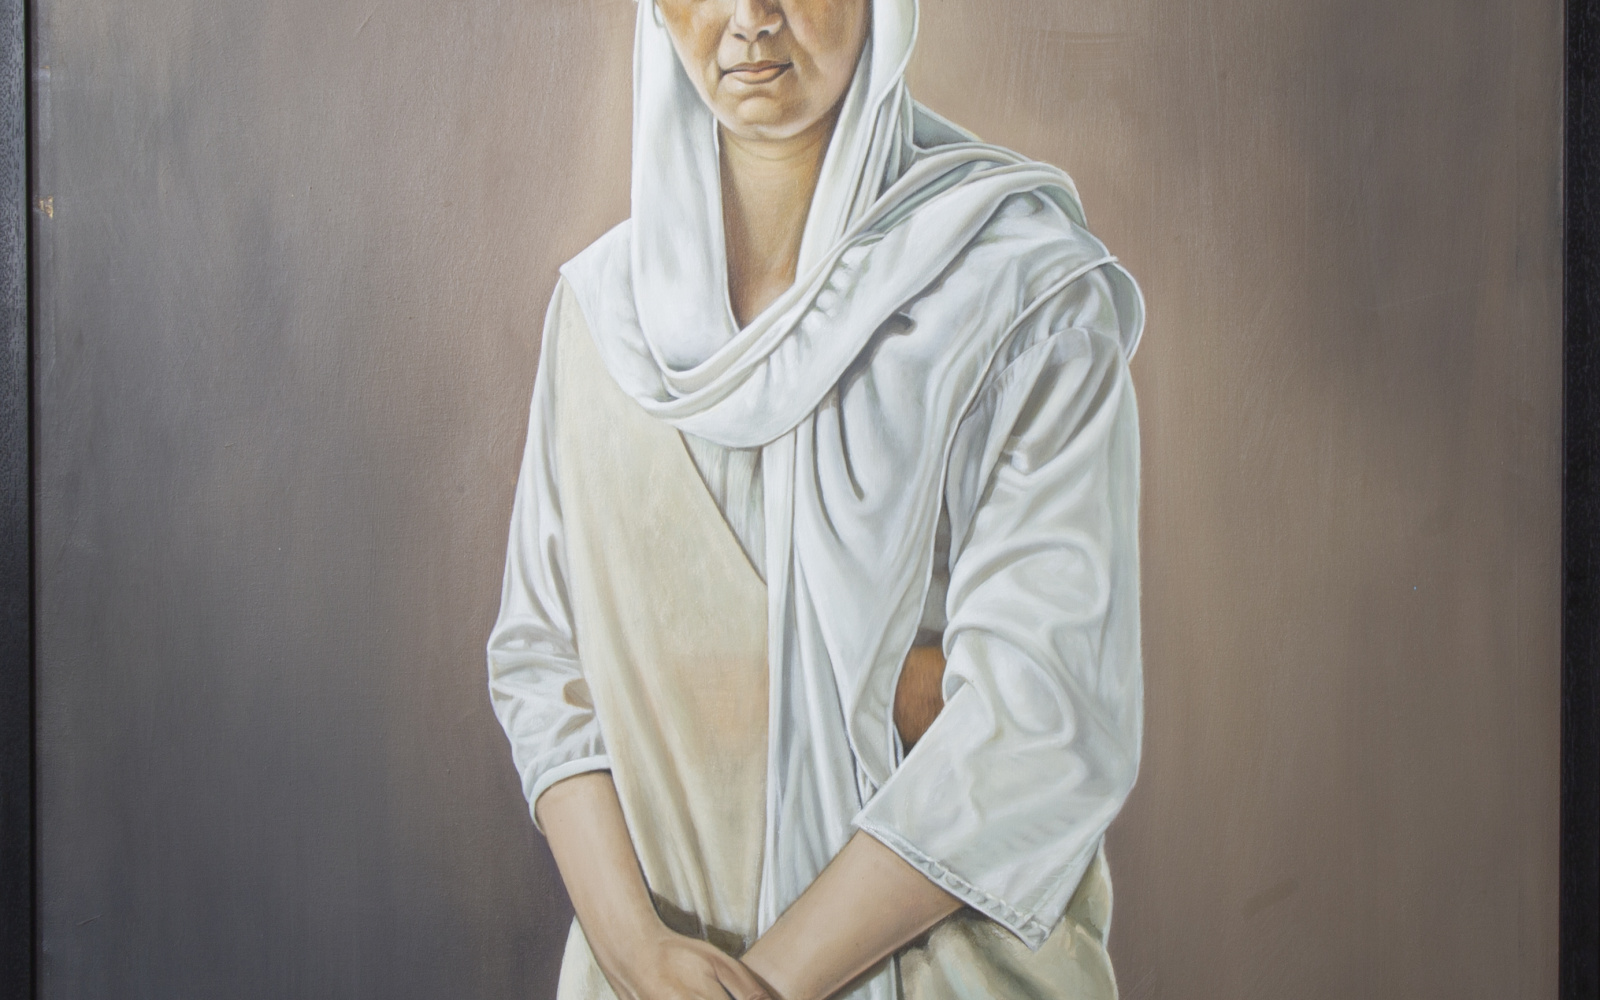 On display is a painting of a woman veiled in white. 